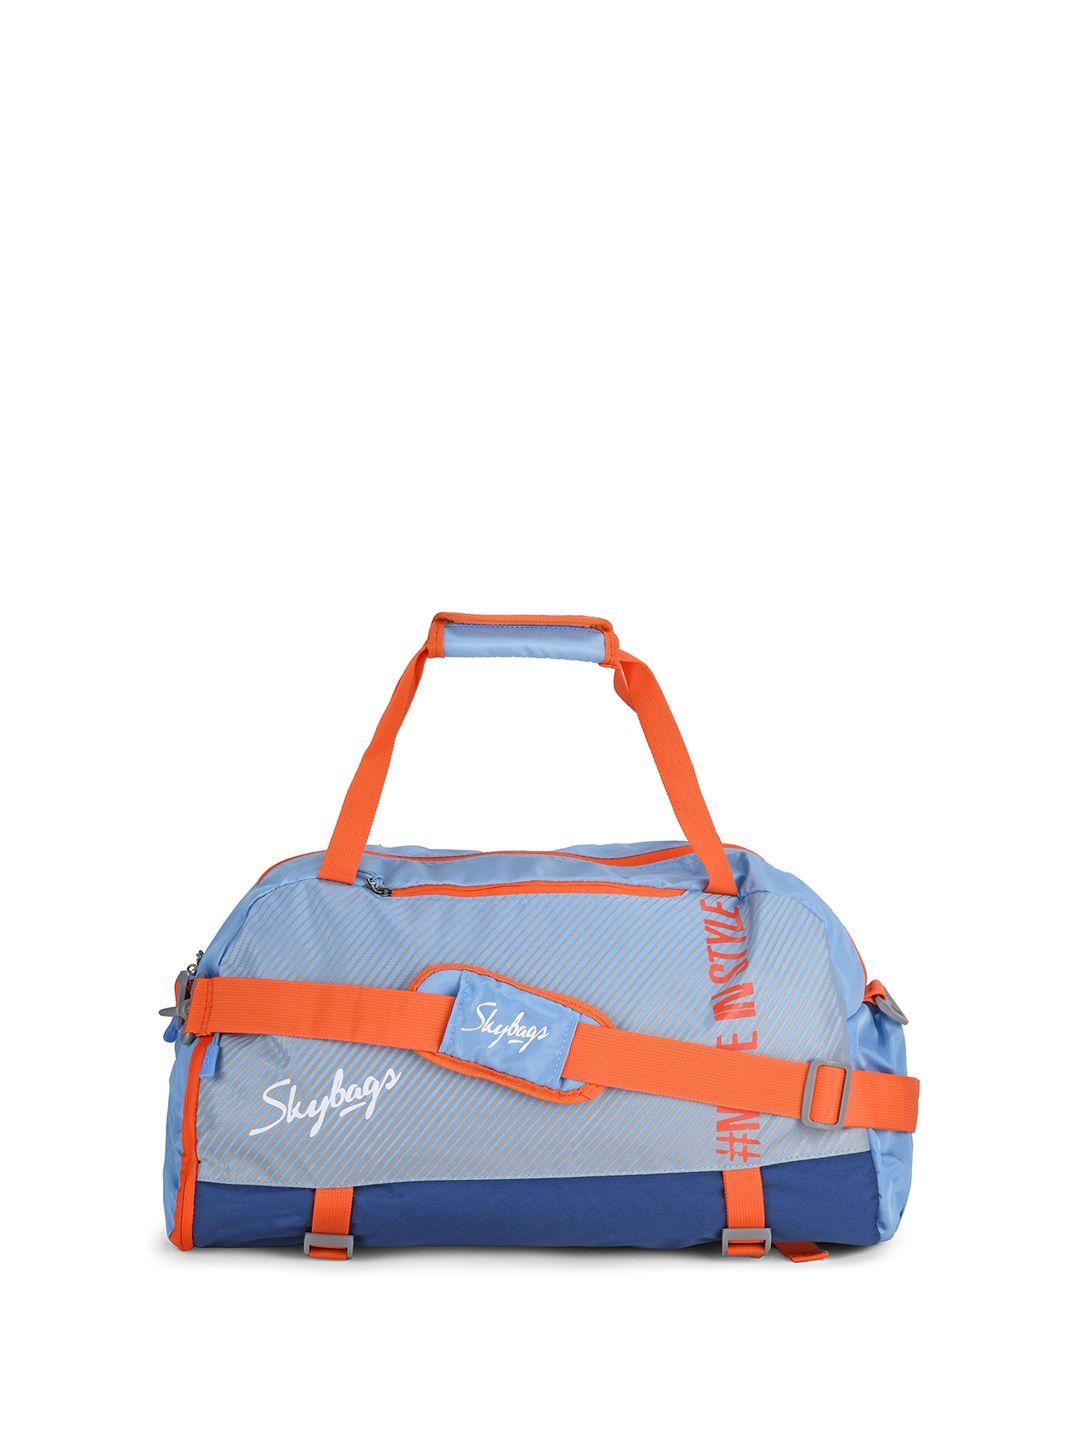 skybags-striped-small-duffel-bag